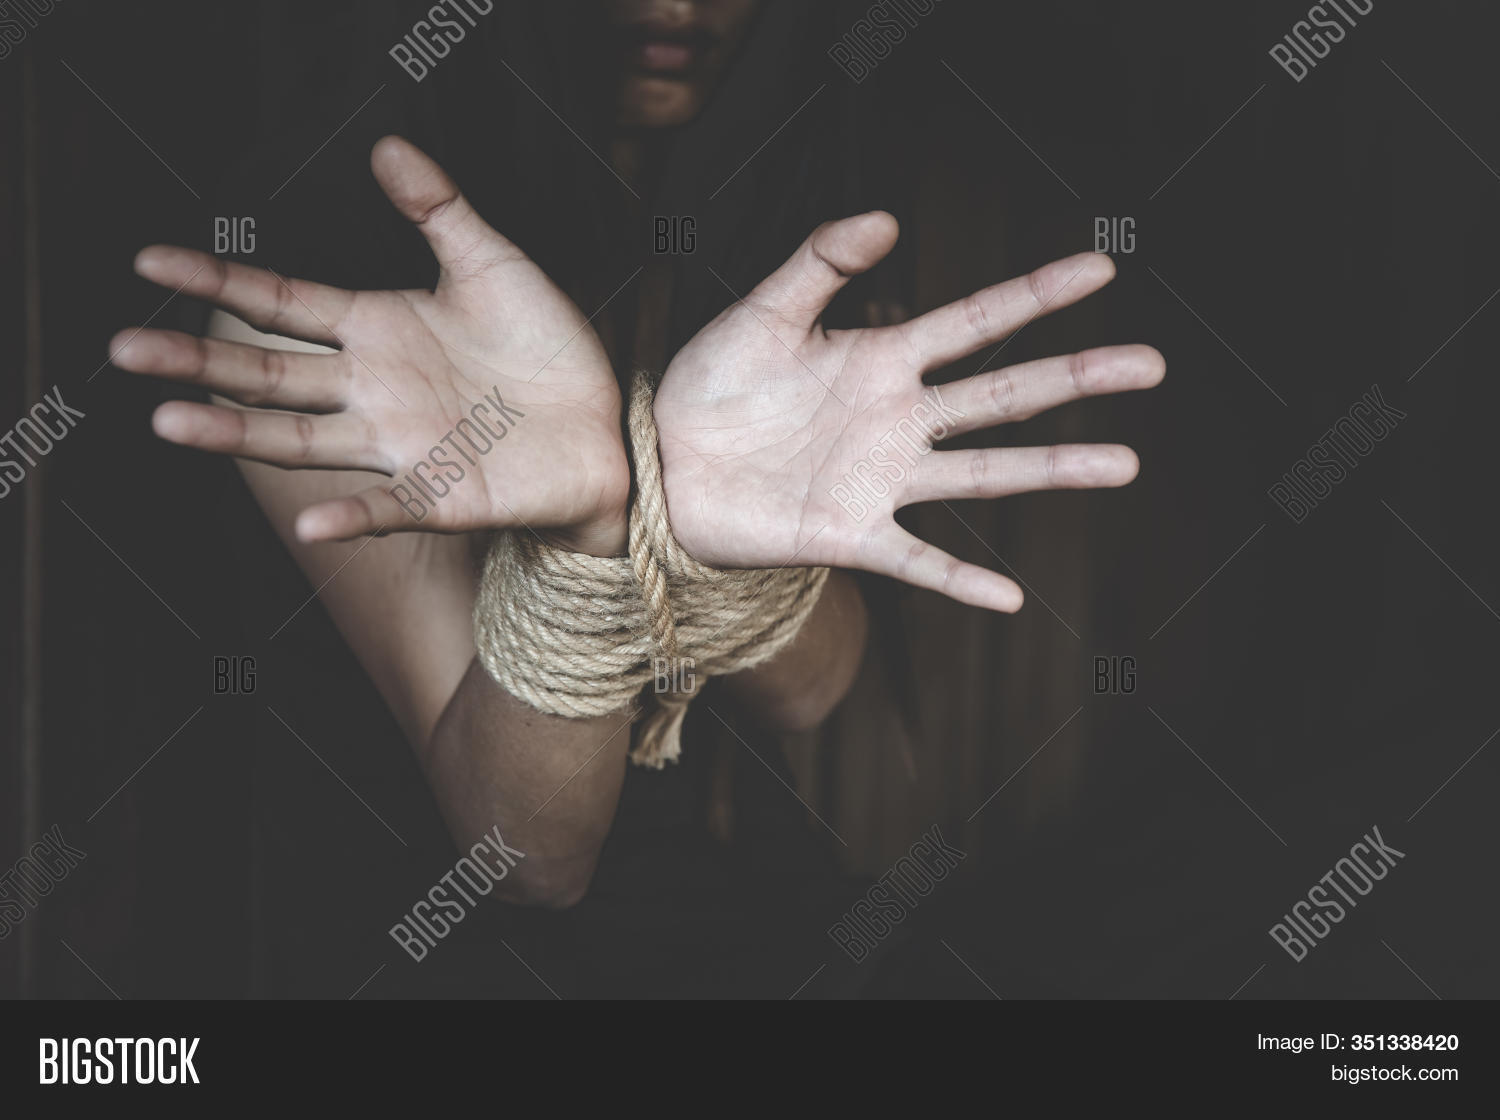 cynthia clements share tied up and abused photos